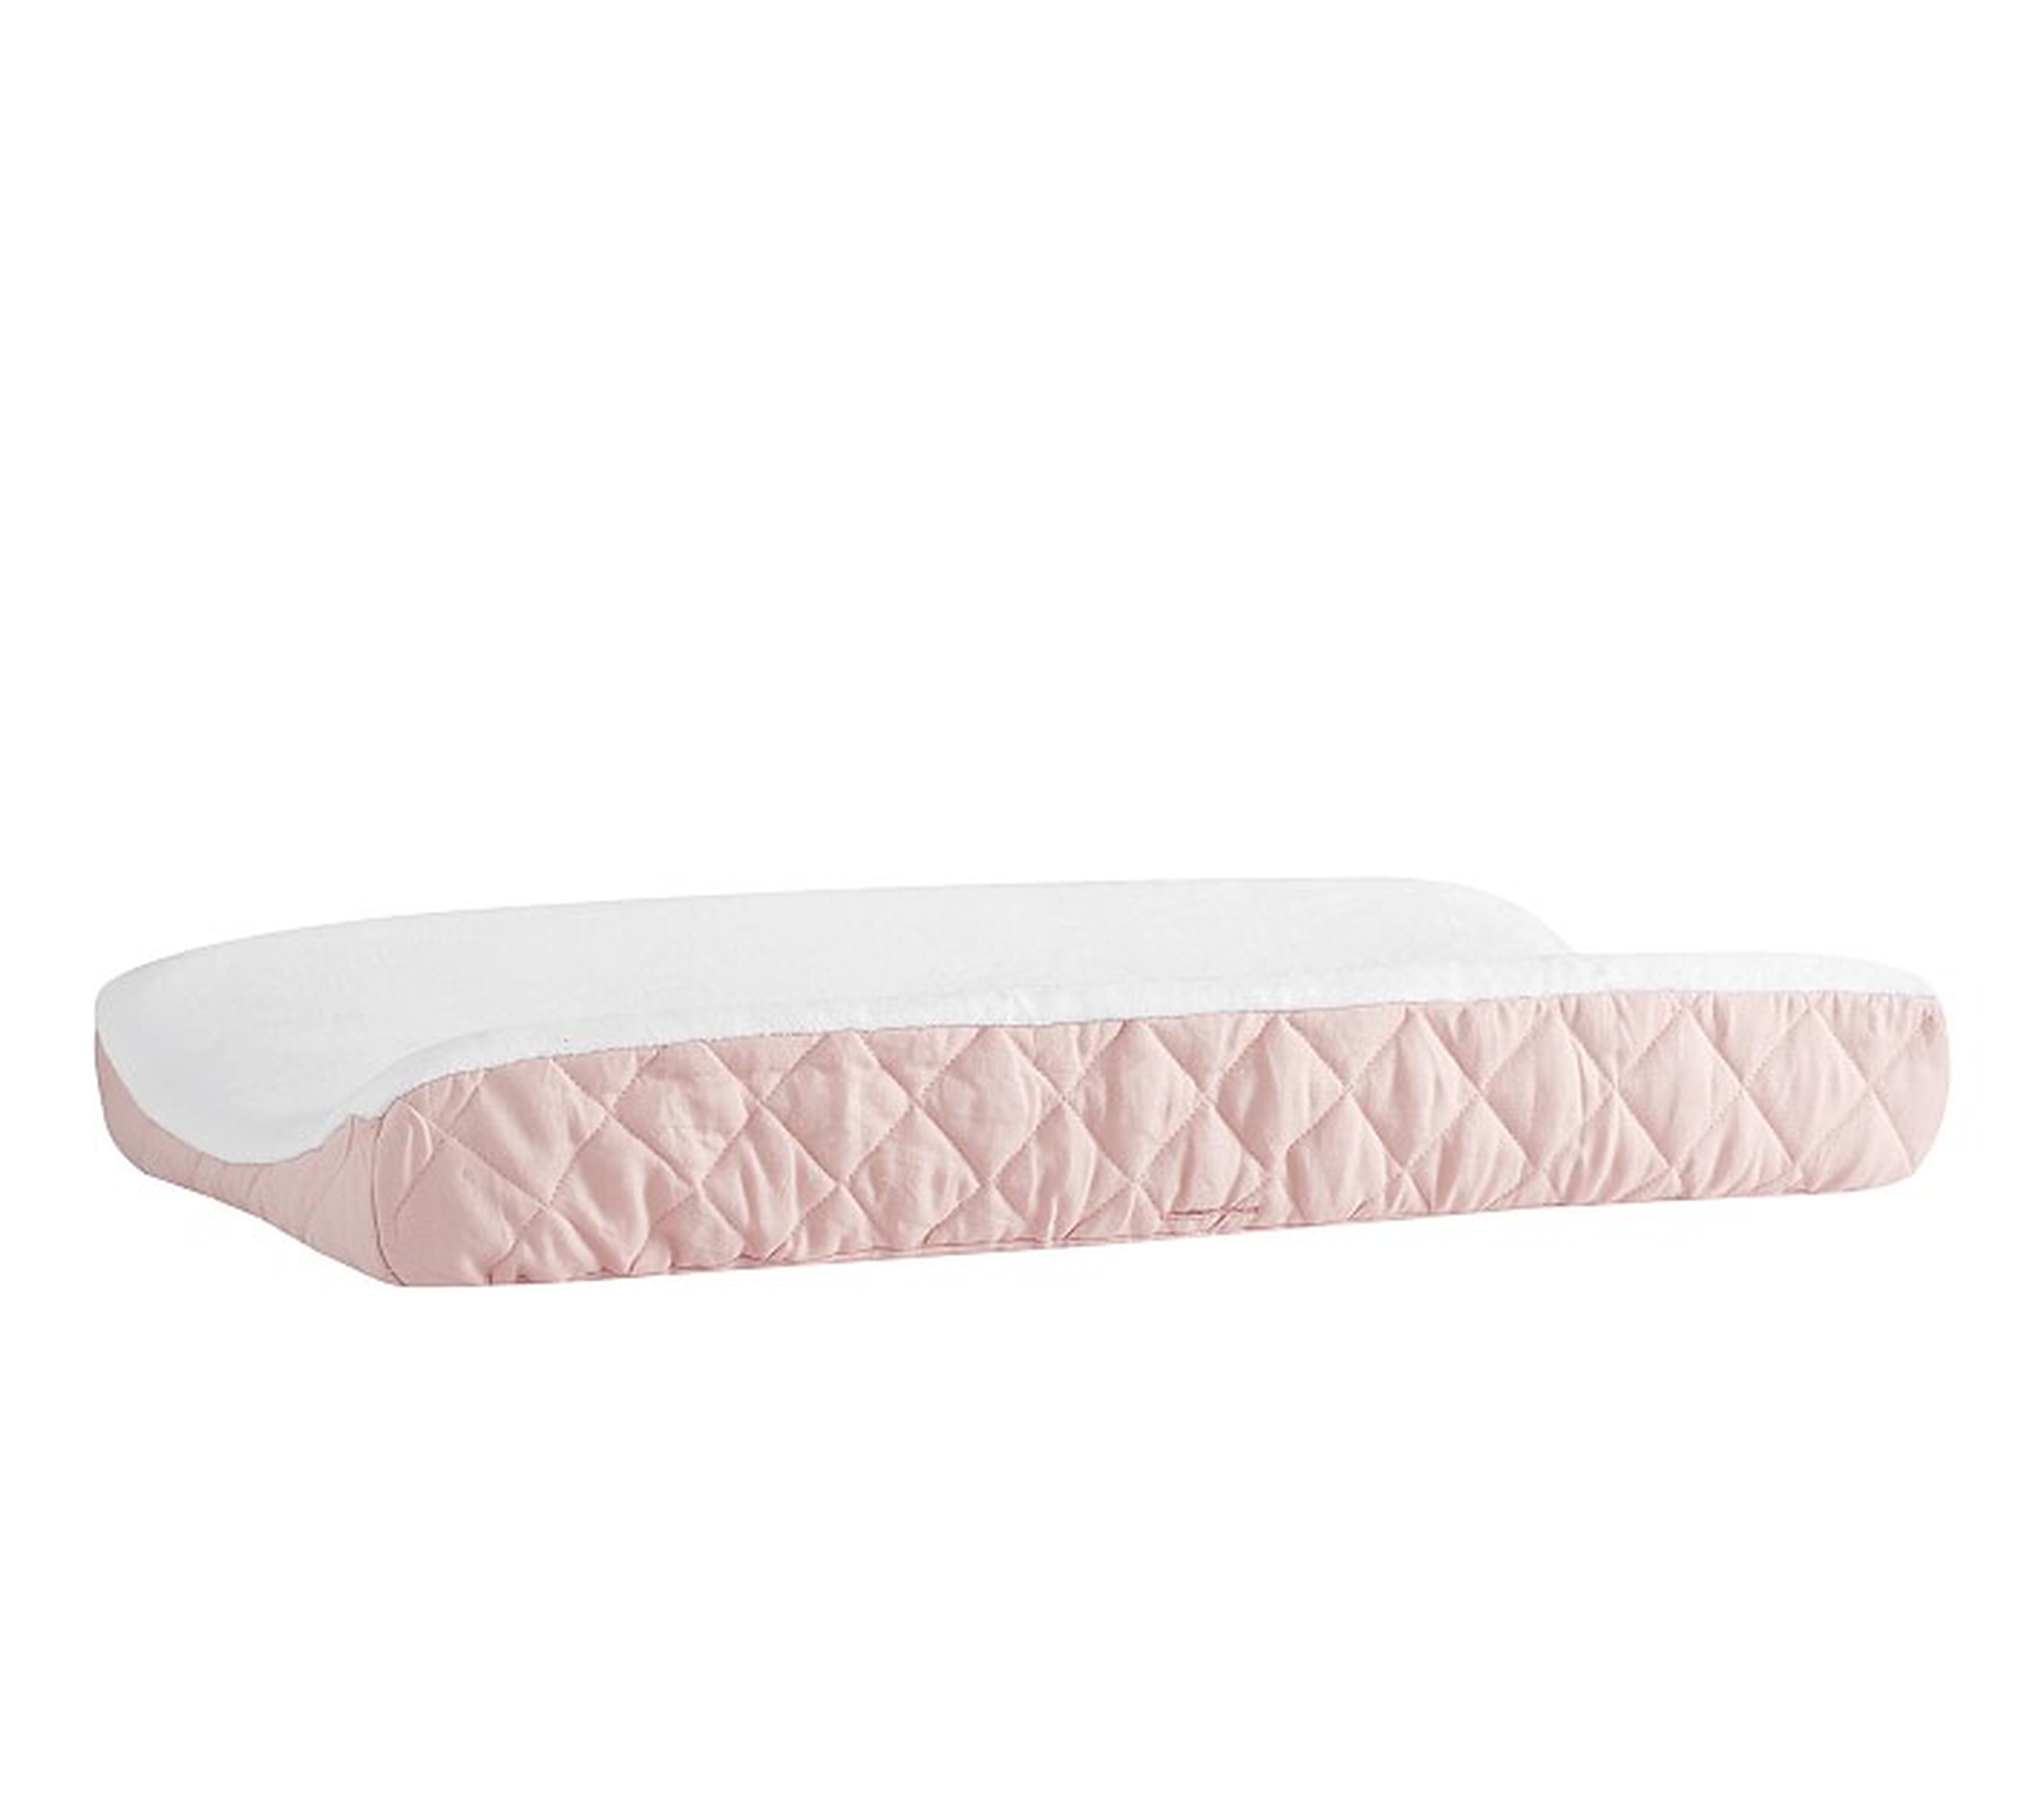 Belgian Flax Linen Changing Pad Cover, Blush - Pottery Barn Kids